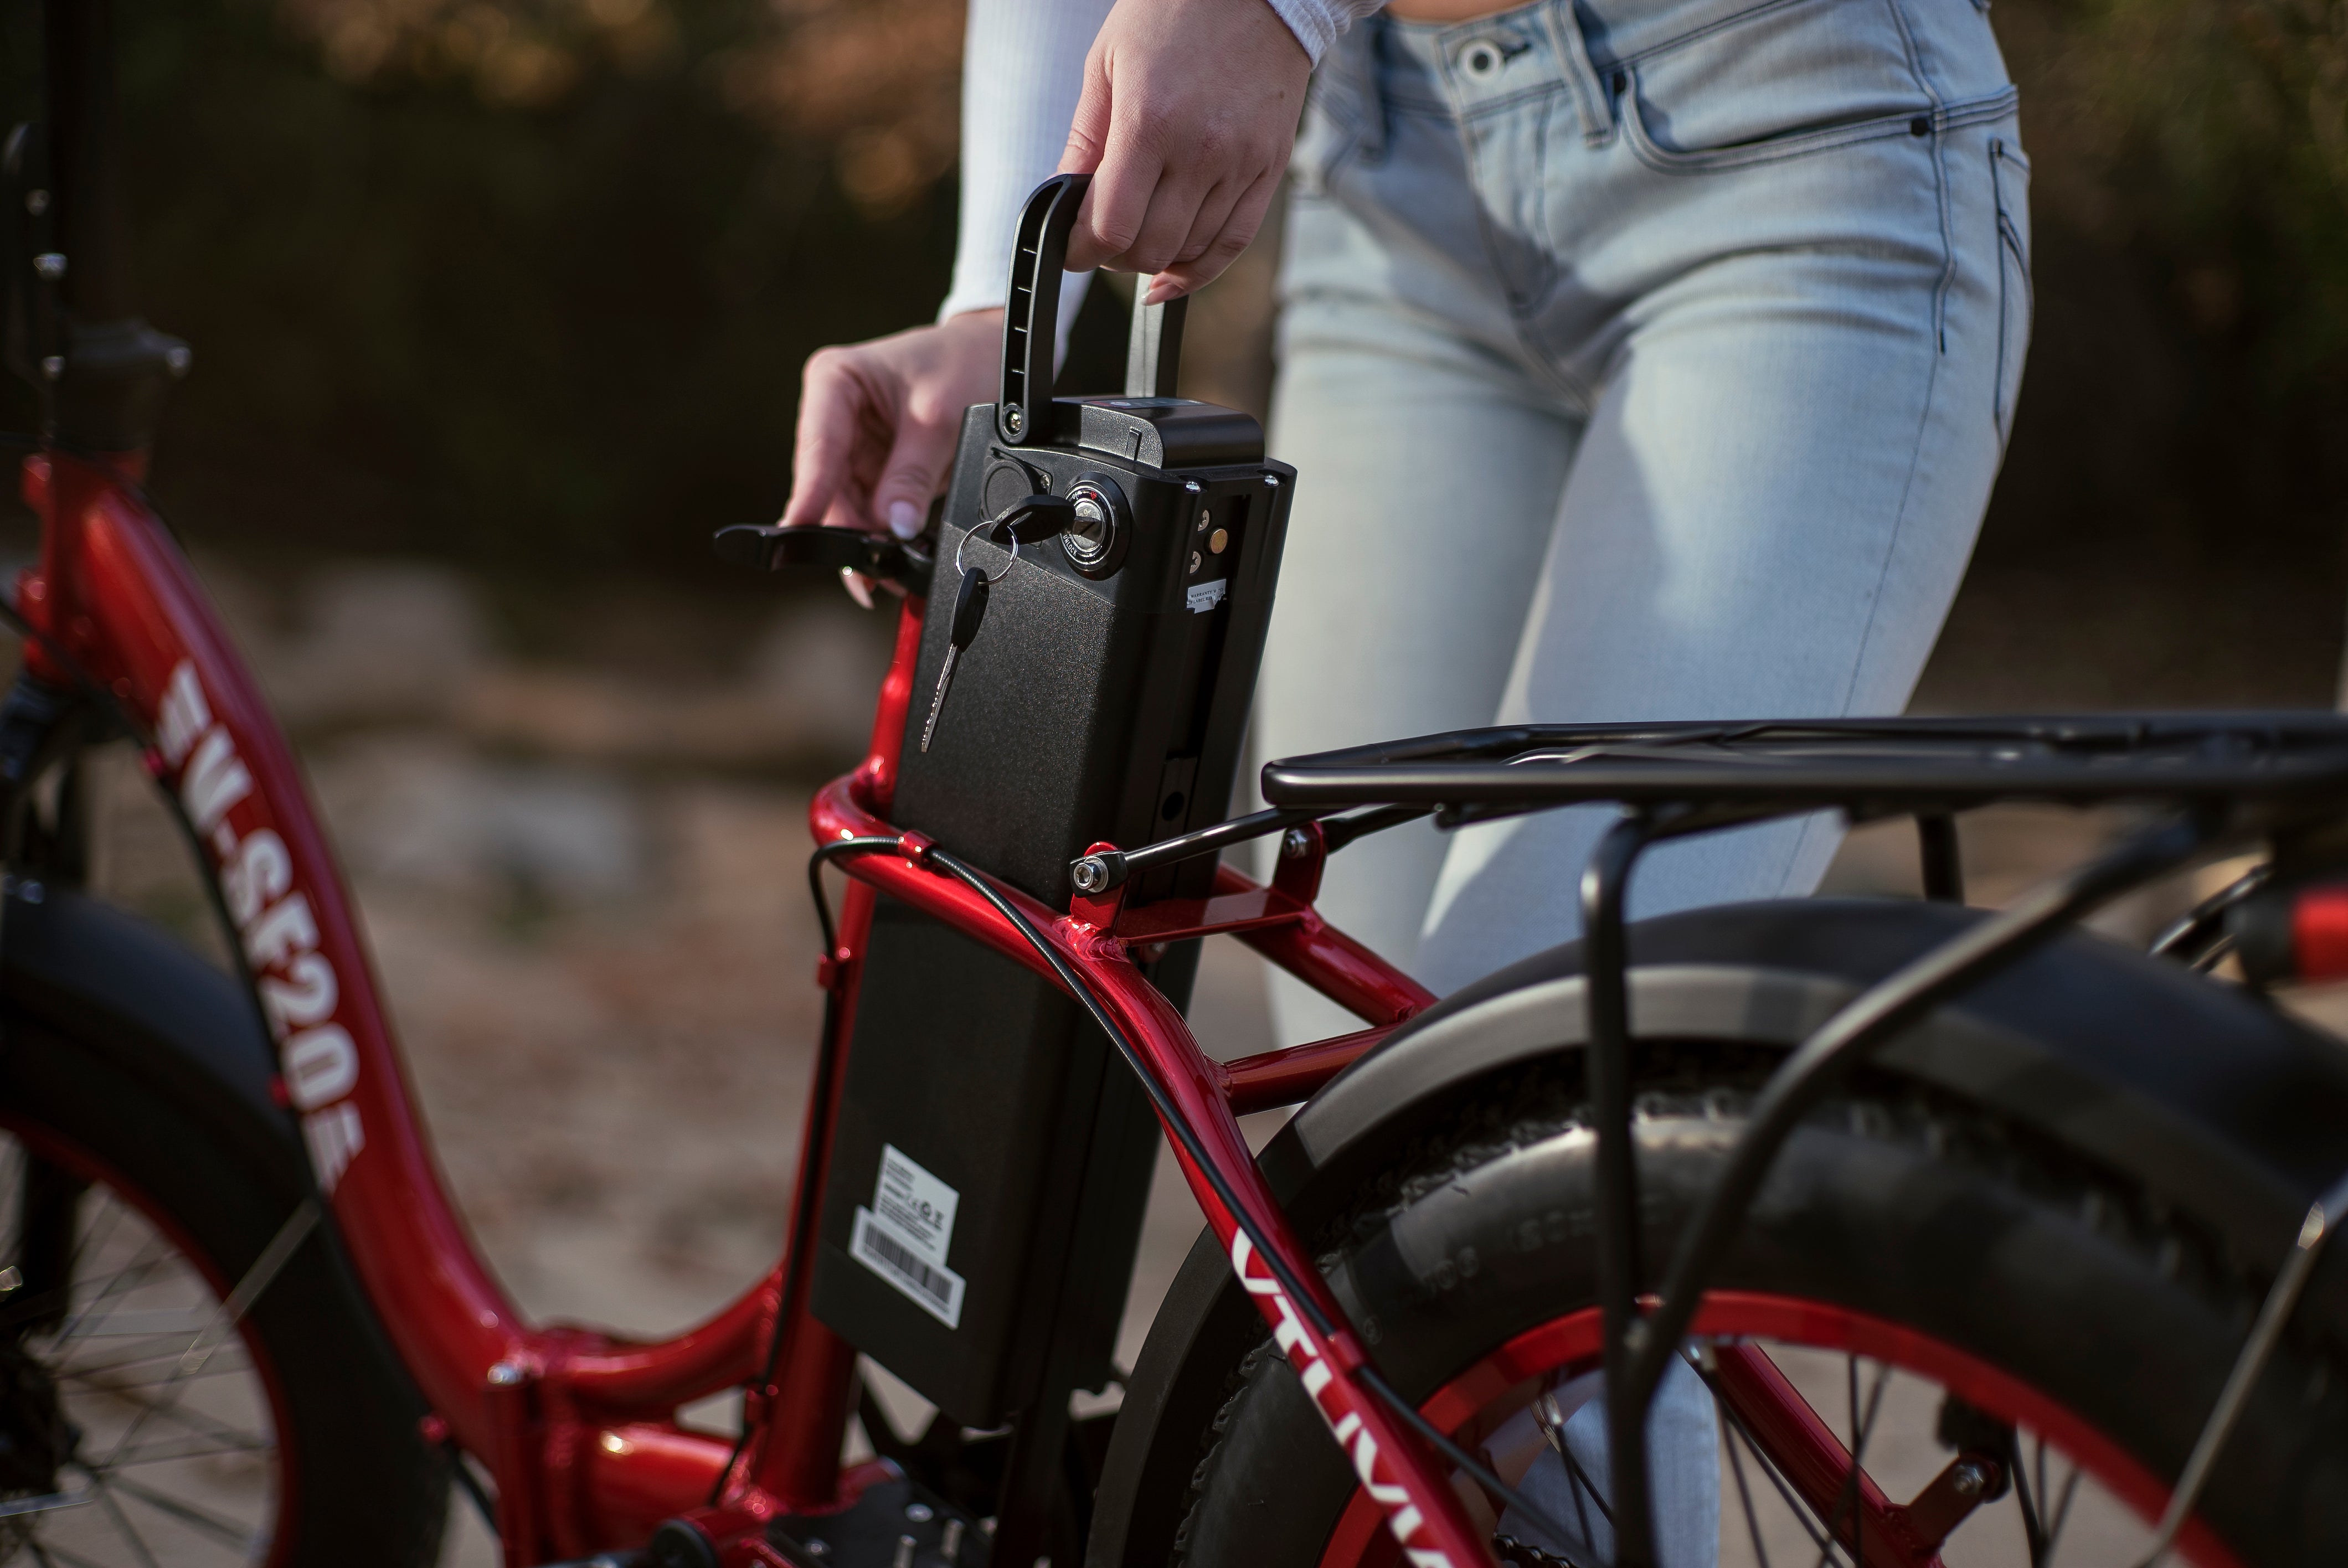 Safety Tips for VTUVIA E-Bike: How to Turn Your Bike?